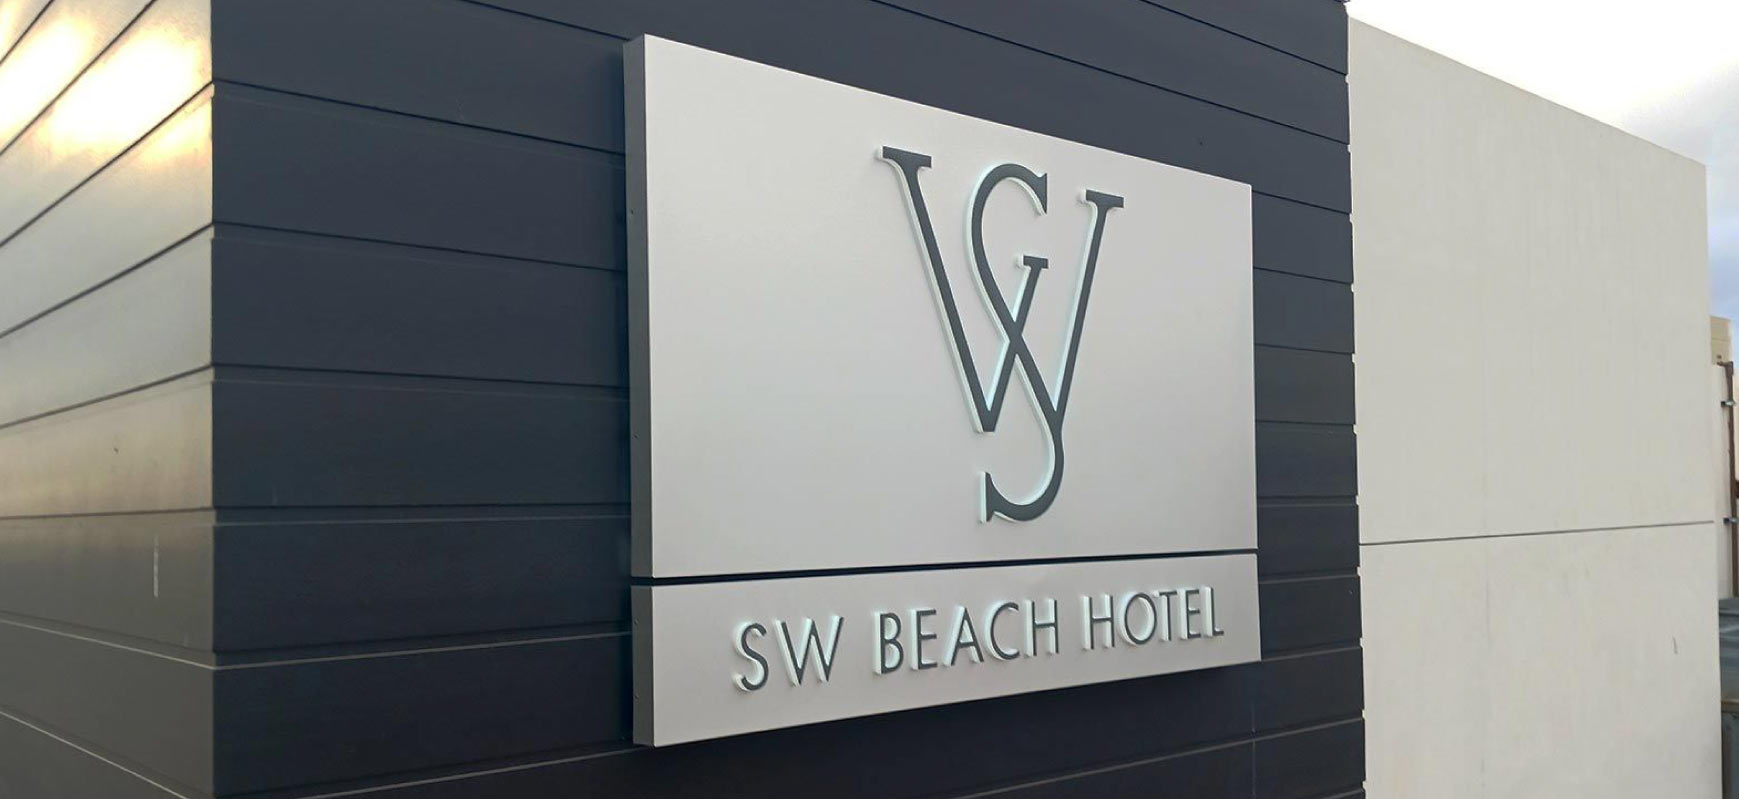 SW Beach Hotel wall signage with the brand name and logo made of aluminum and lexan